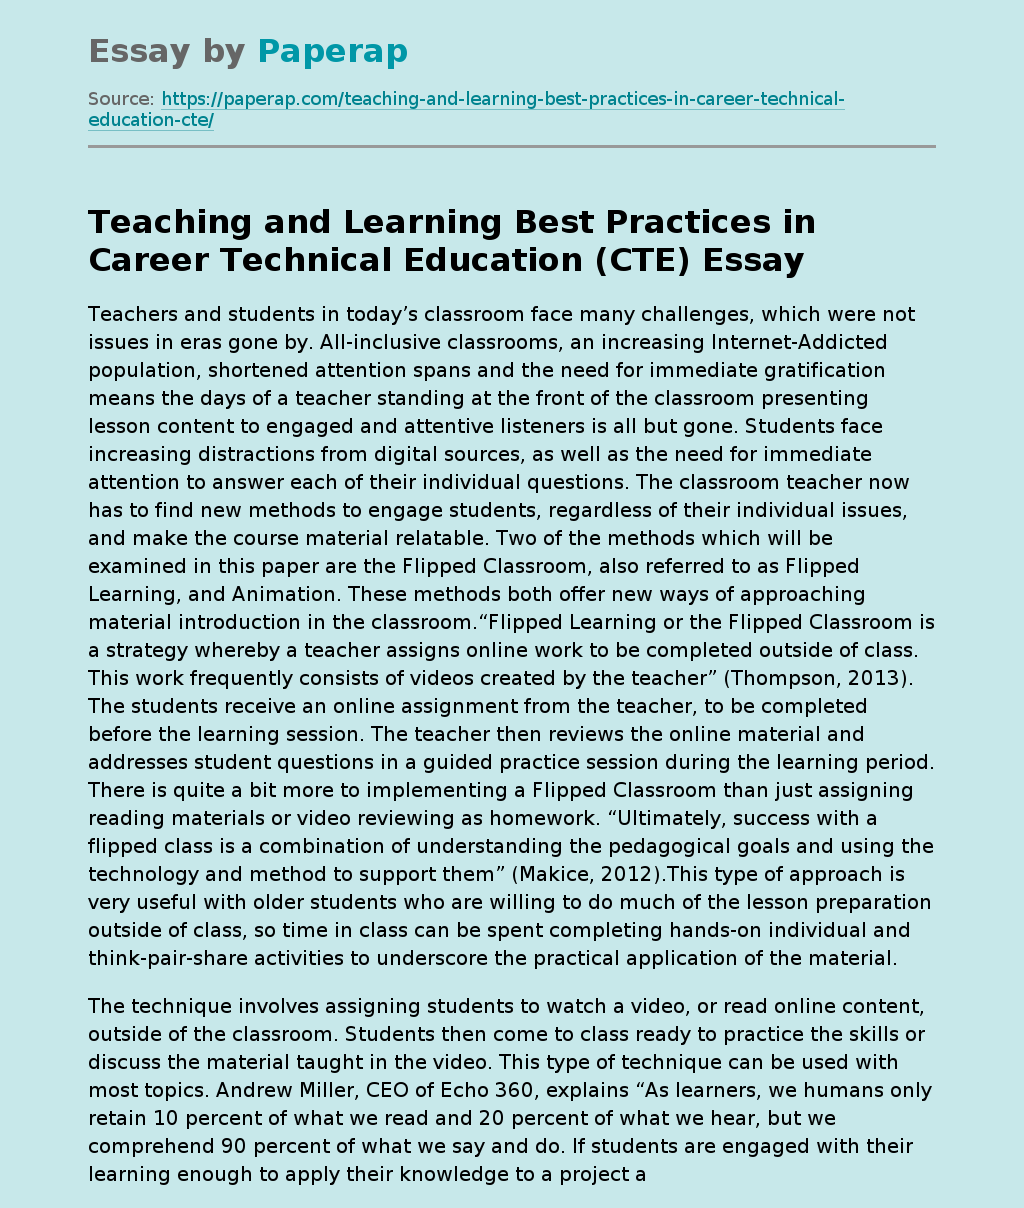 Teaching and Learning Best Practices in Career Technical Education (CTE)